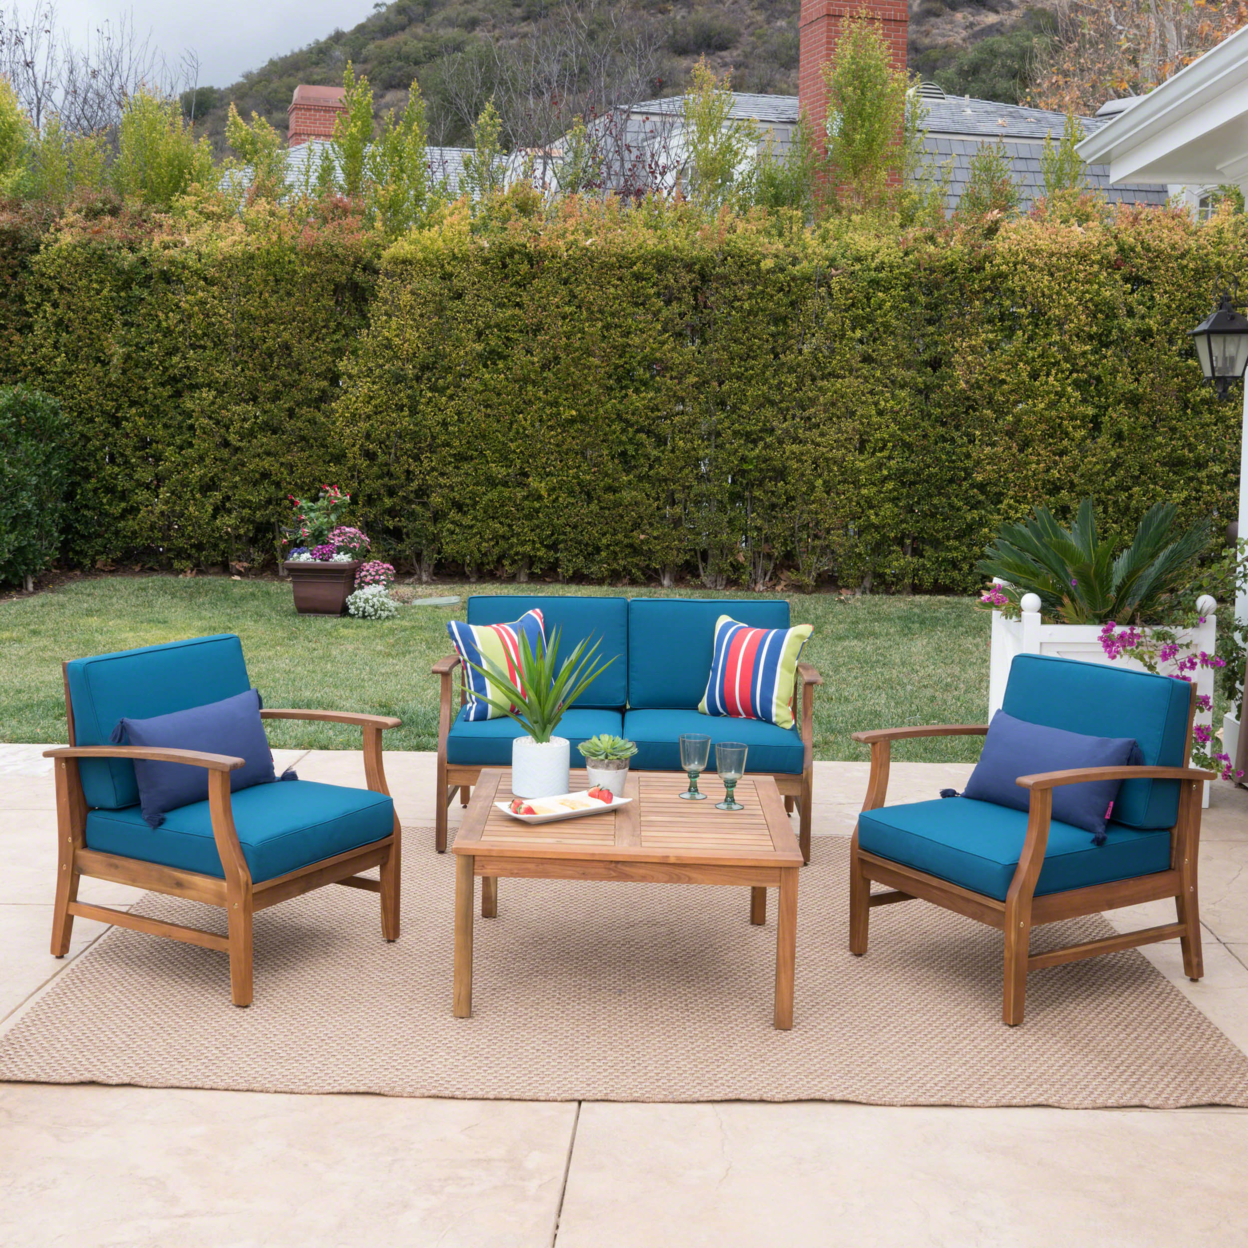 Lorelei Outdoor 4 Seat Teak Finished Acacia Wood Chat Set With Water Resistant Cushions - Blue